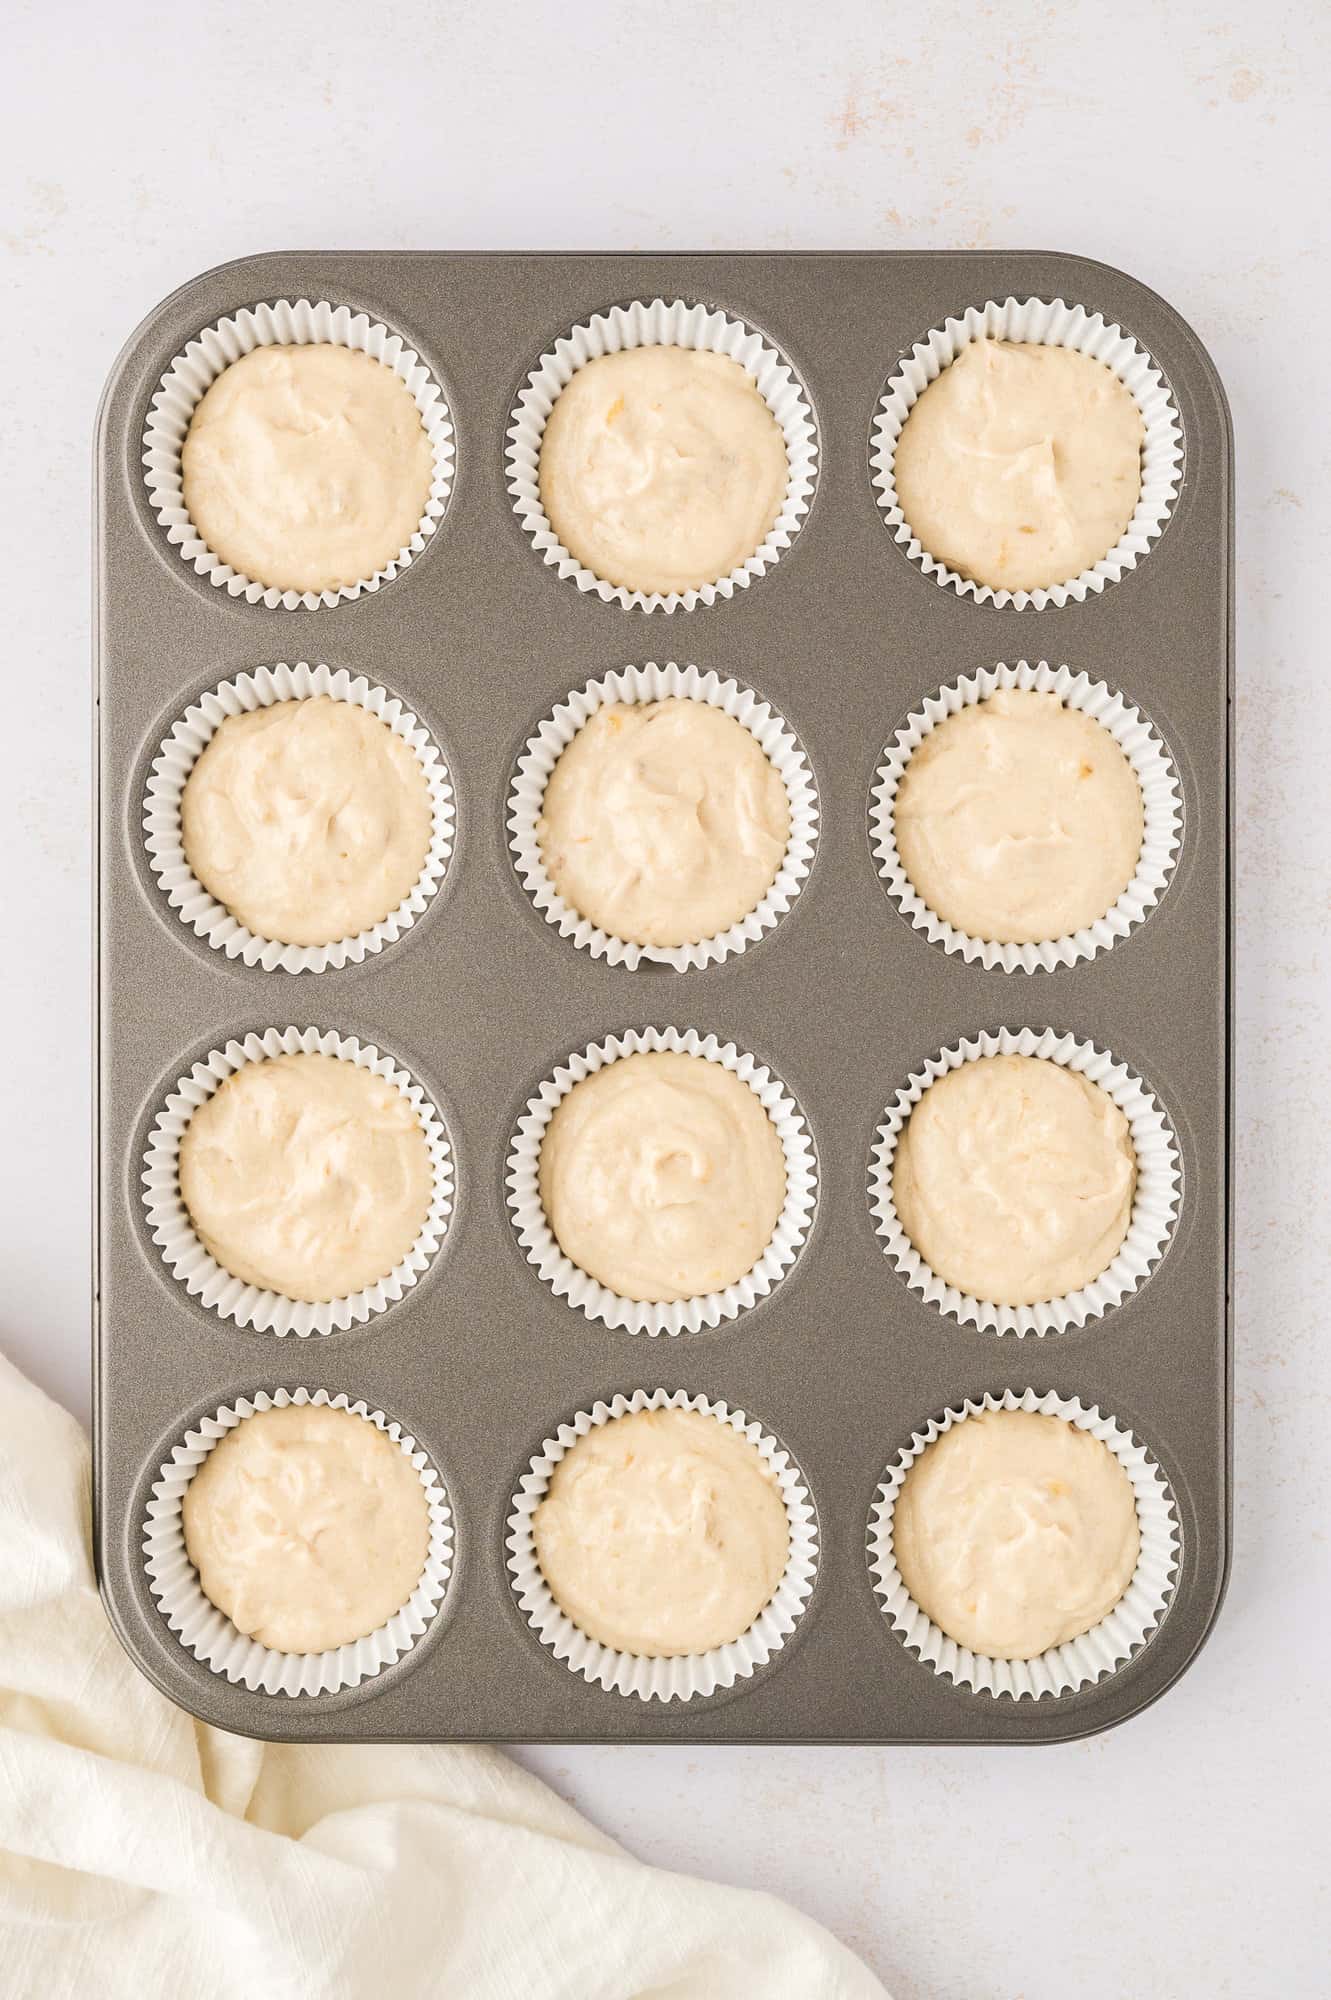 Cupcake batter added to paper lined muffin tin.